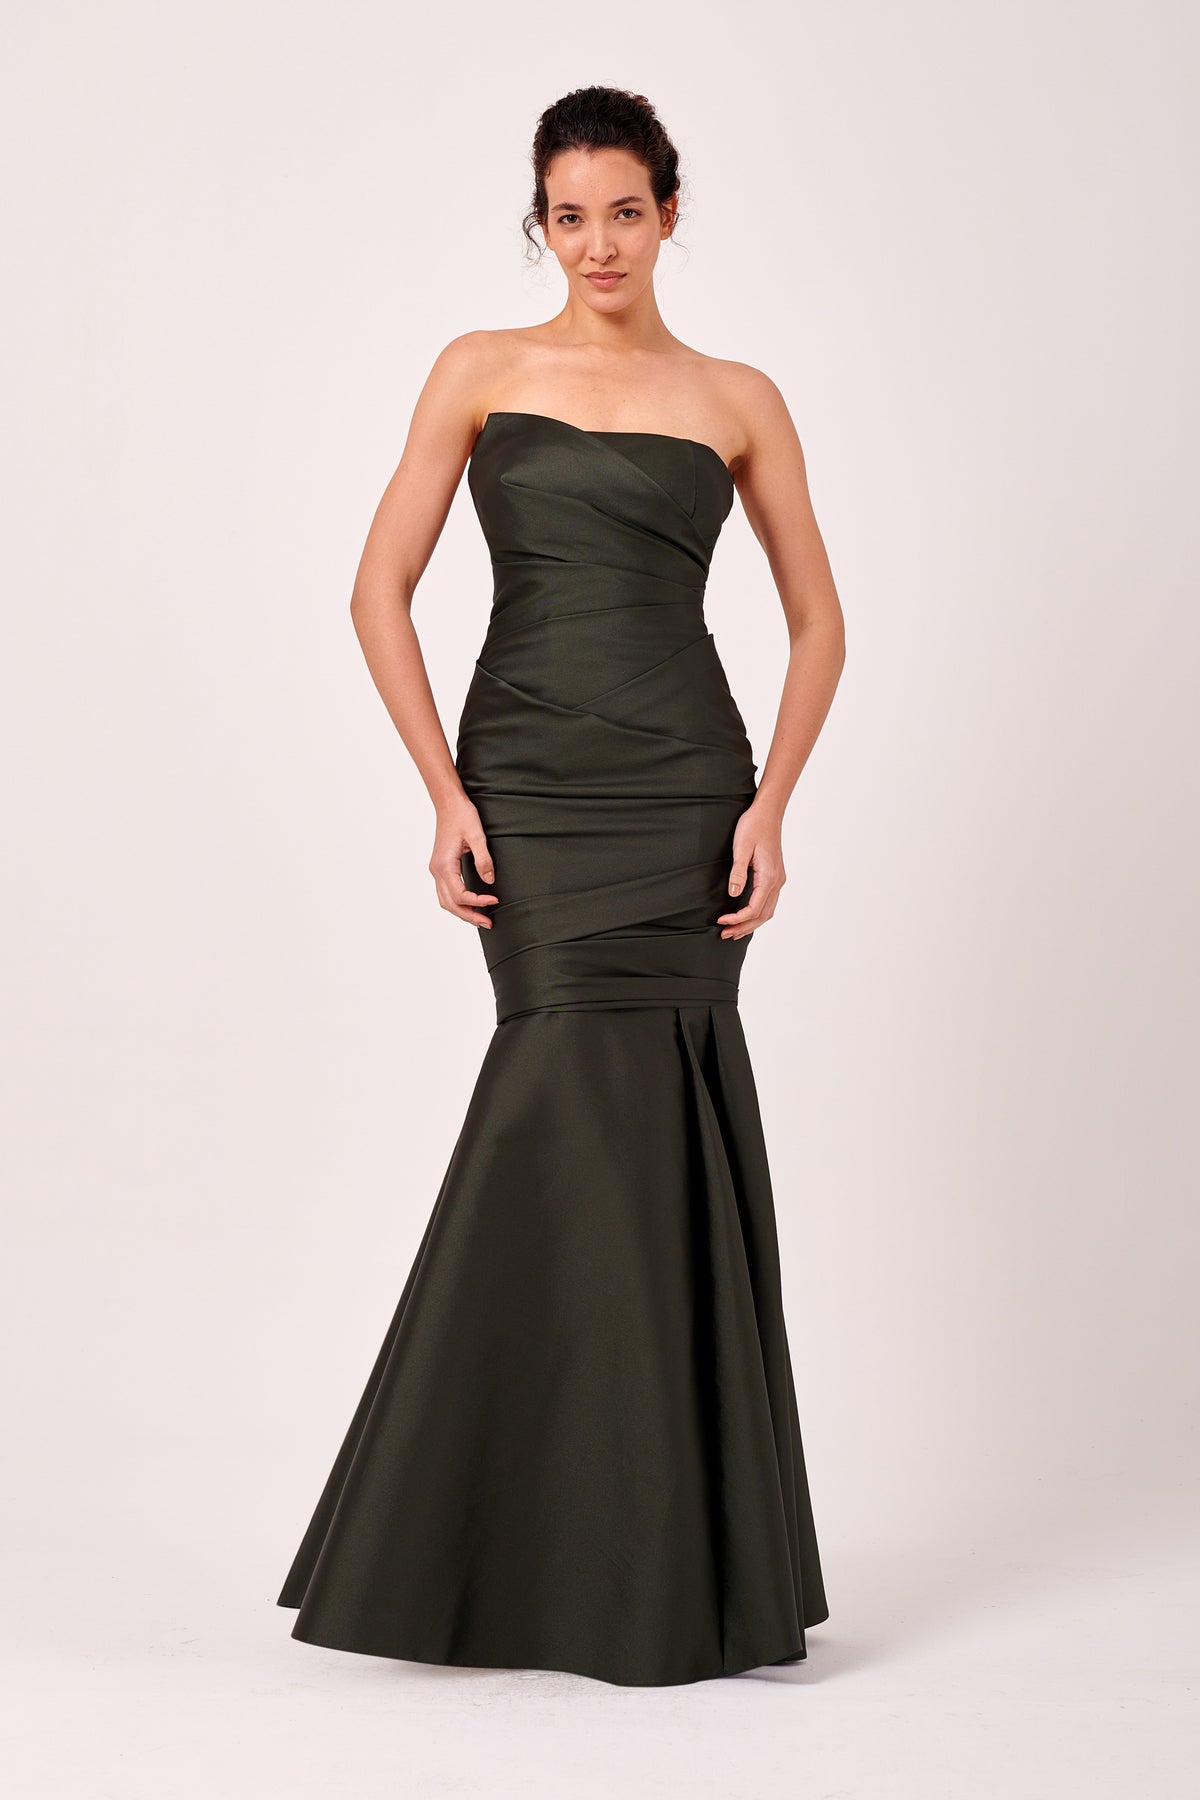 Ruched Bodice Detail Strapless Long Mermaid Gown